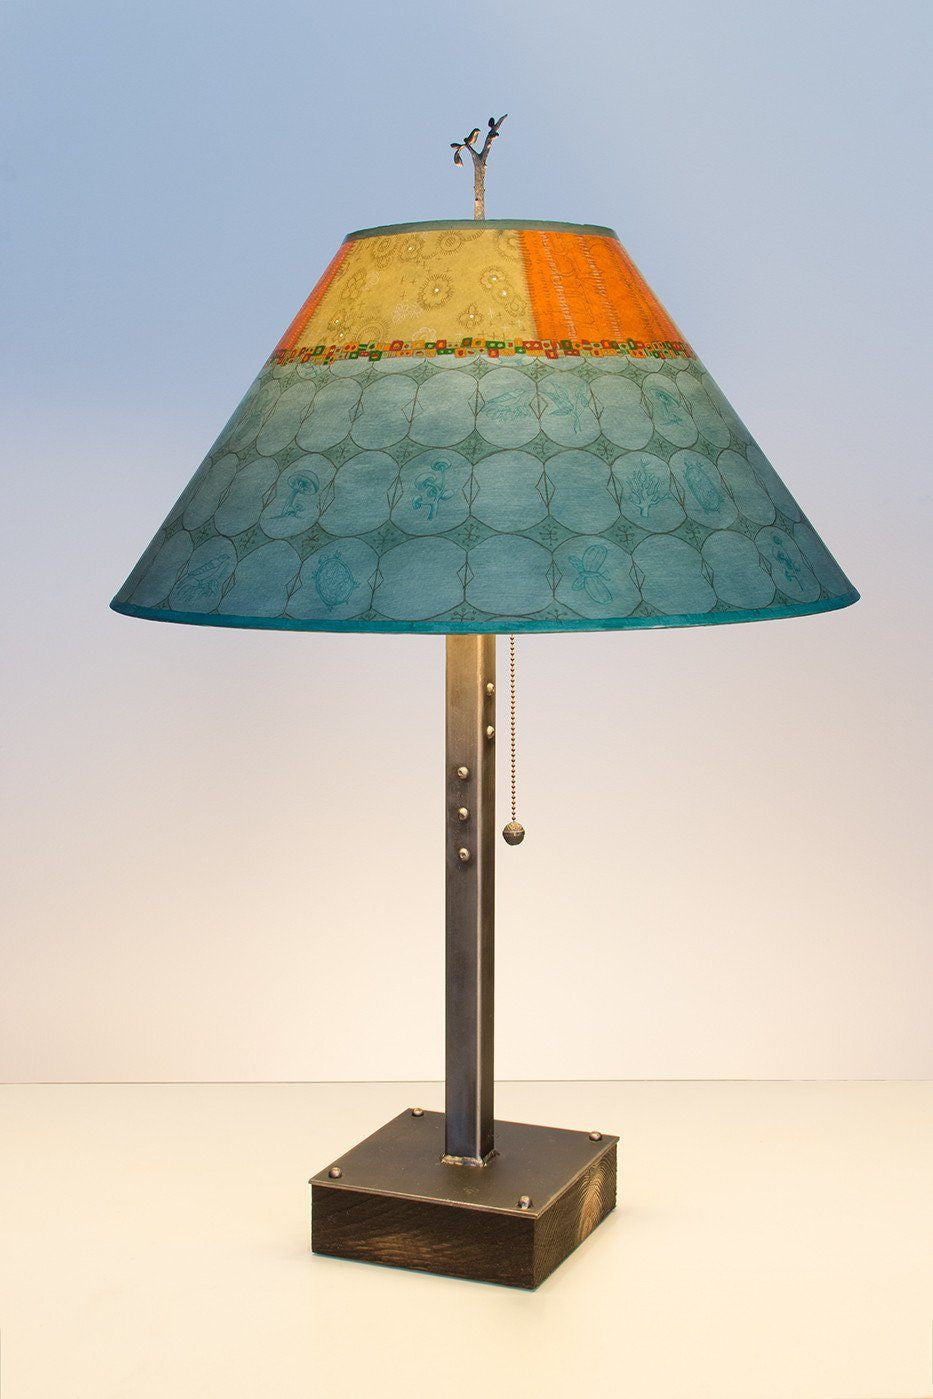 Janna Ugone & Co Table Lamps Steel Table Lamp on Wood with Large Conical Shade in Paradise Pool